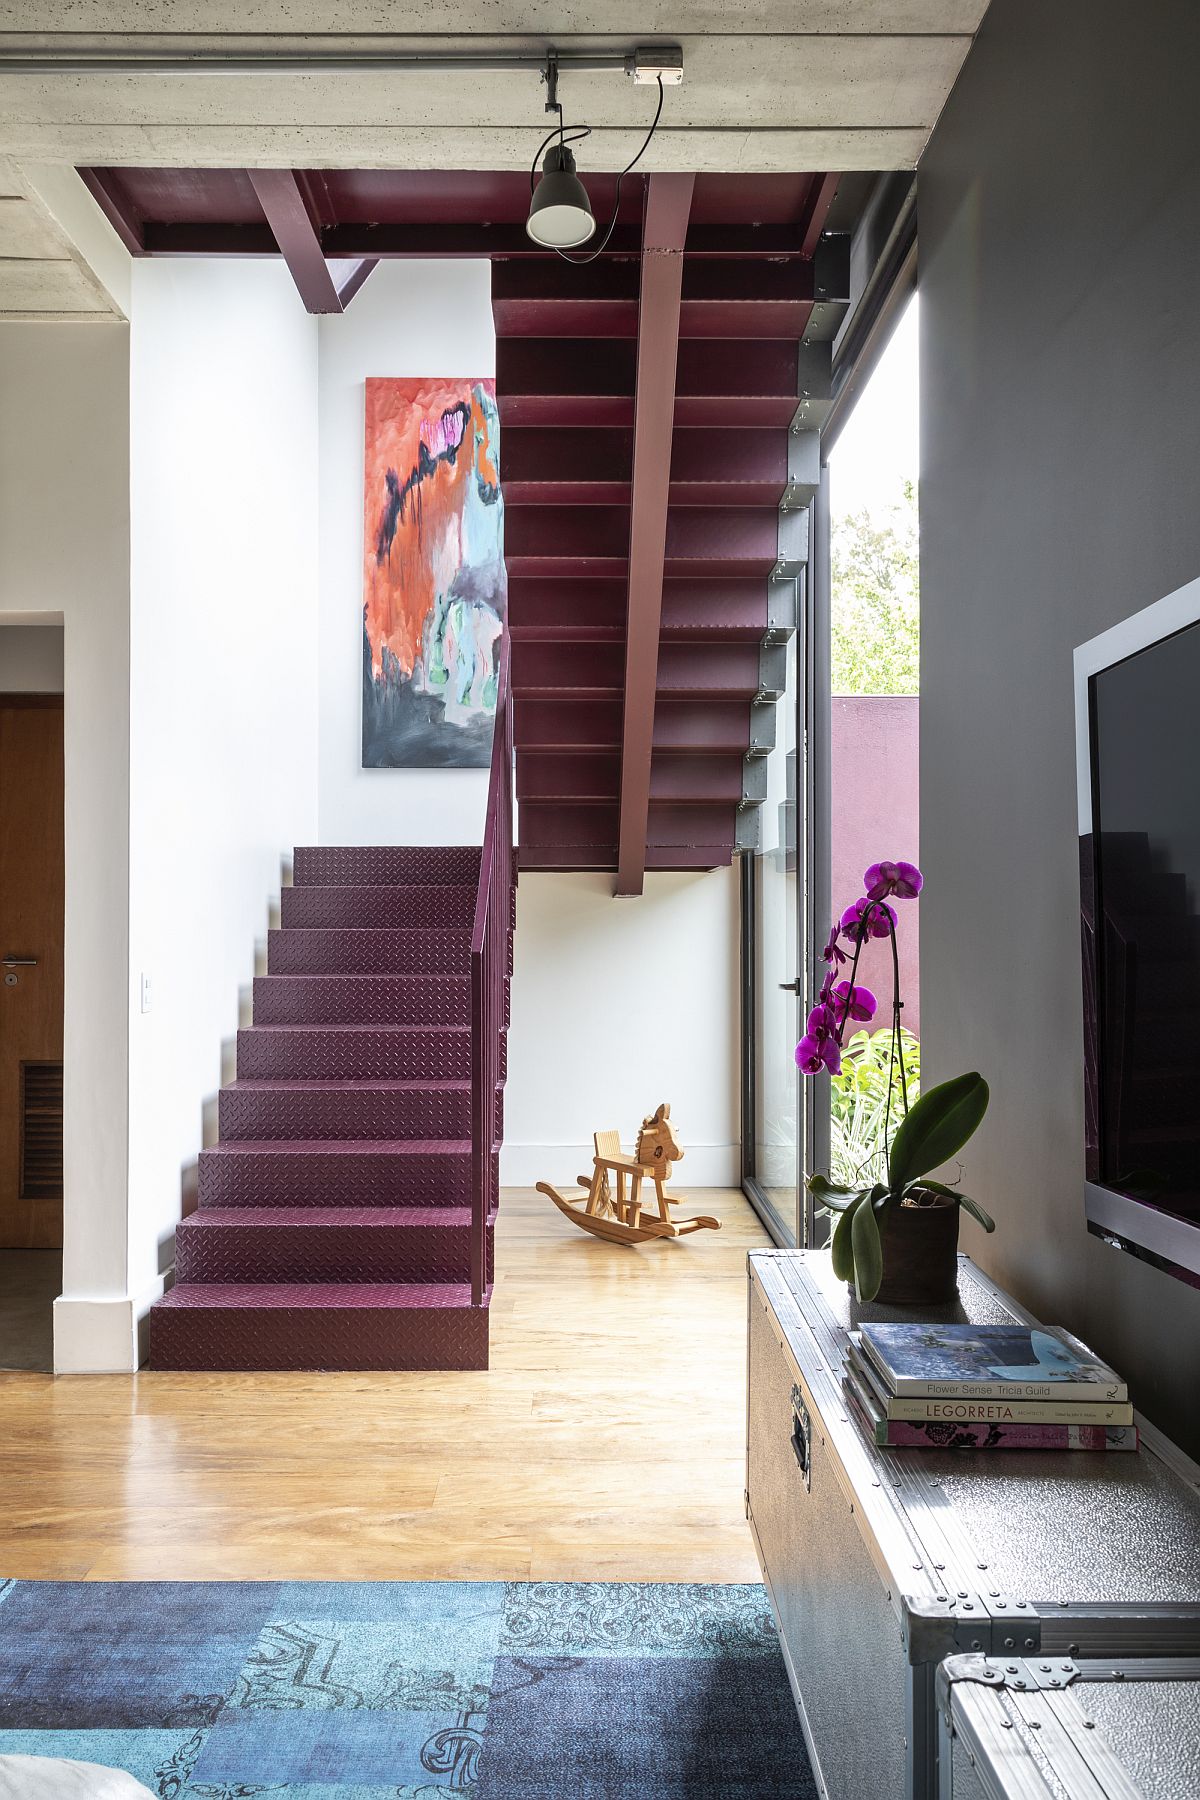 Metallic staircase in bright red brings color and contrast to the modern interior